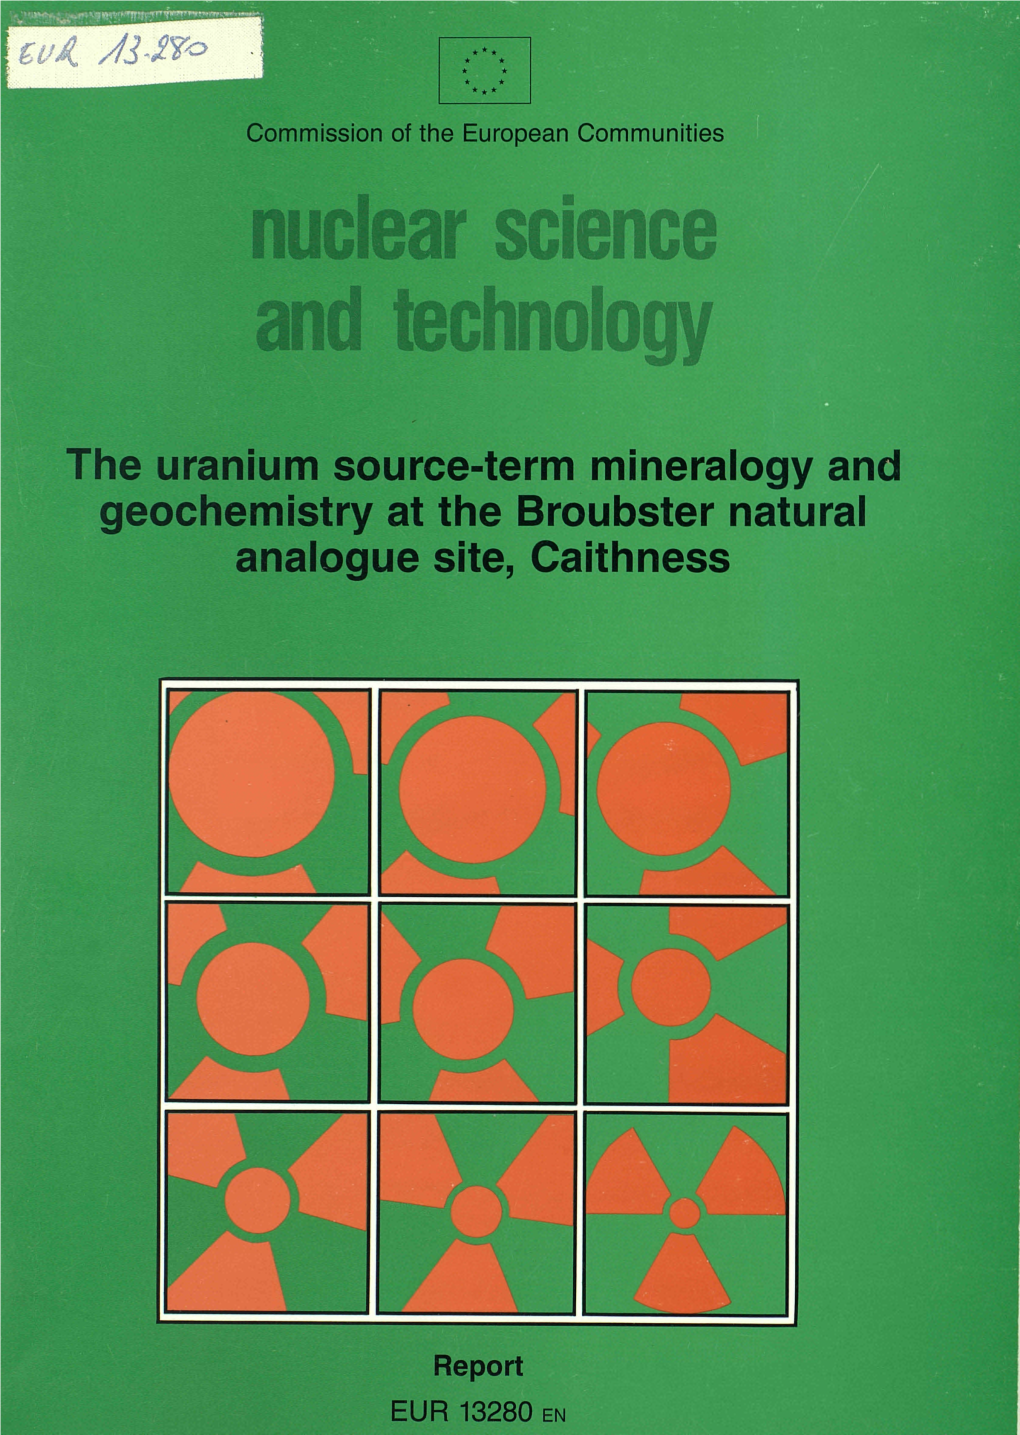 The Uranium Source-Term Mineralogy and Geochemistry at the Broubster Natural Analogue Site, Caithness ■